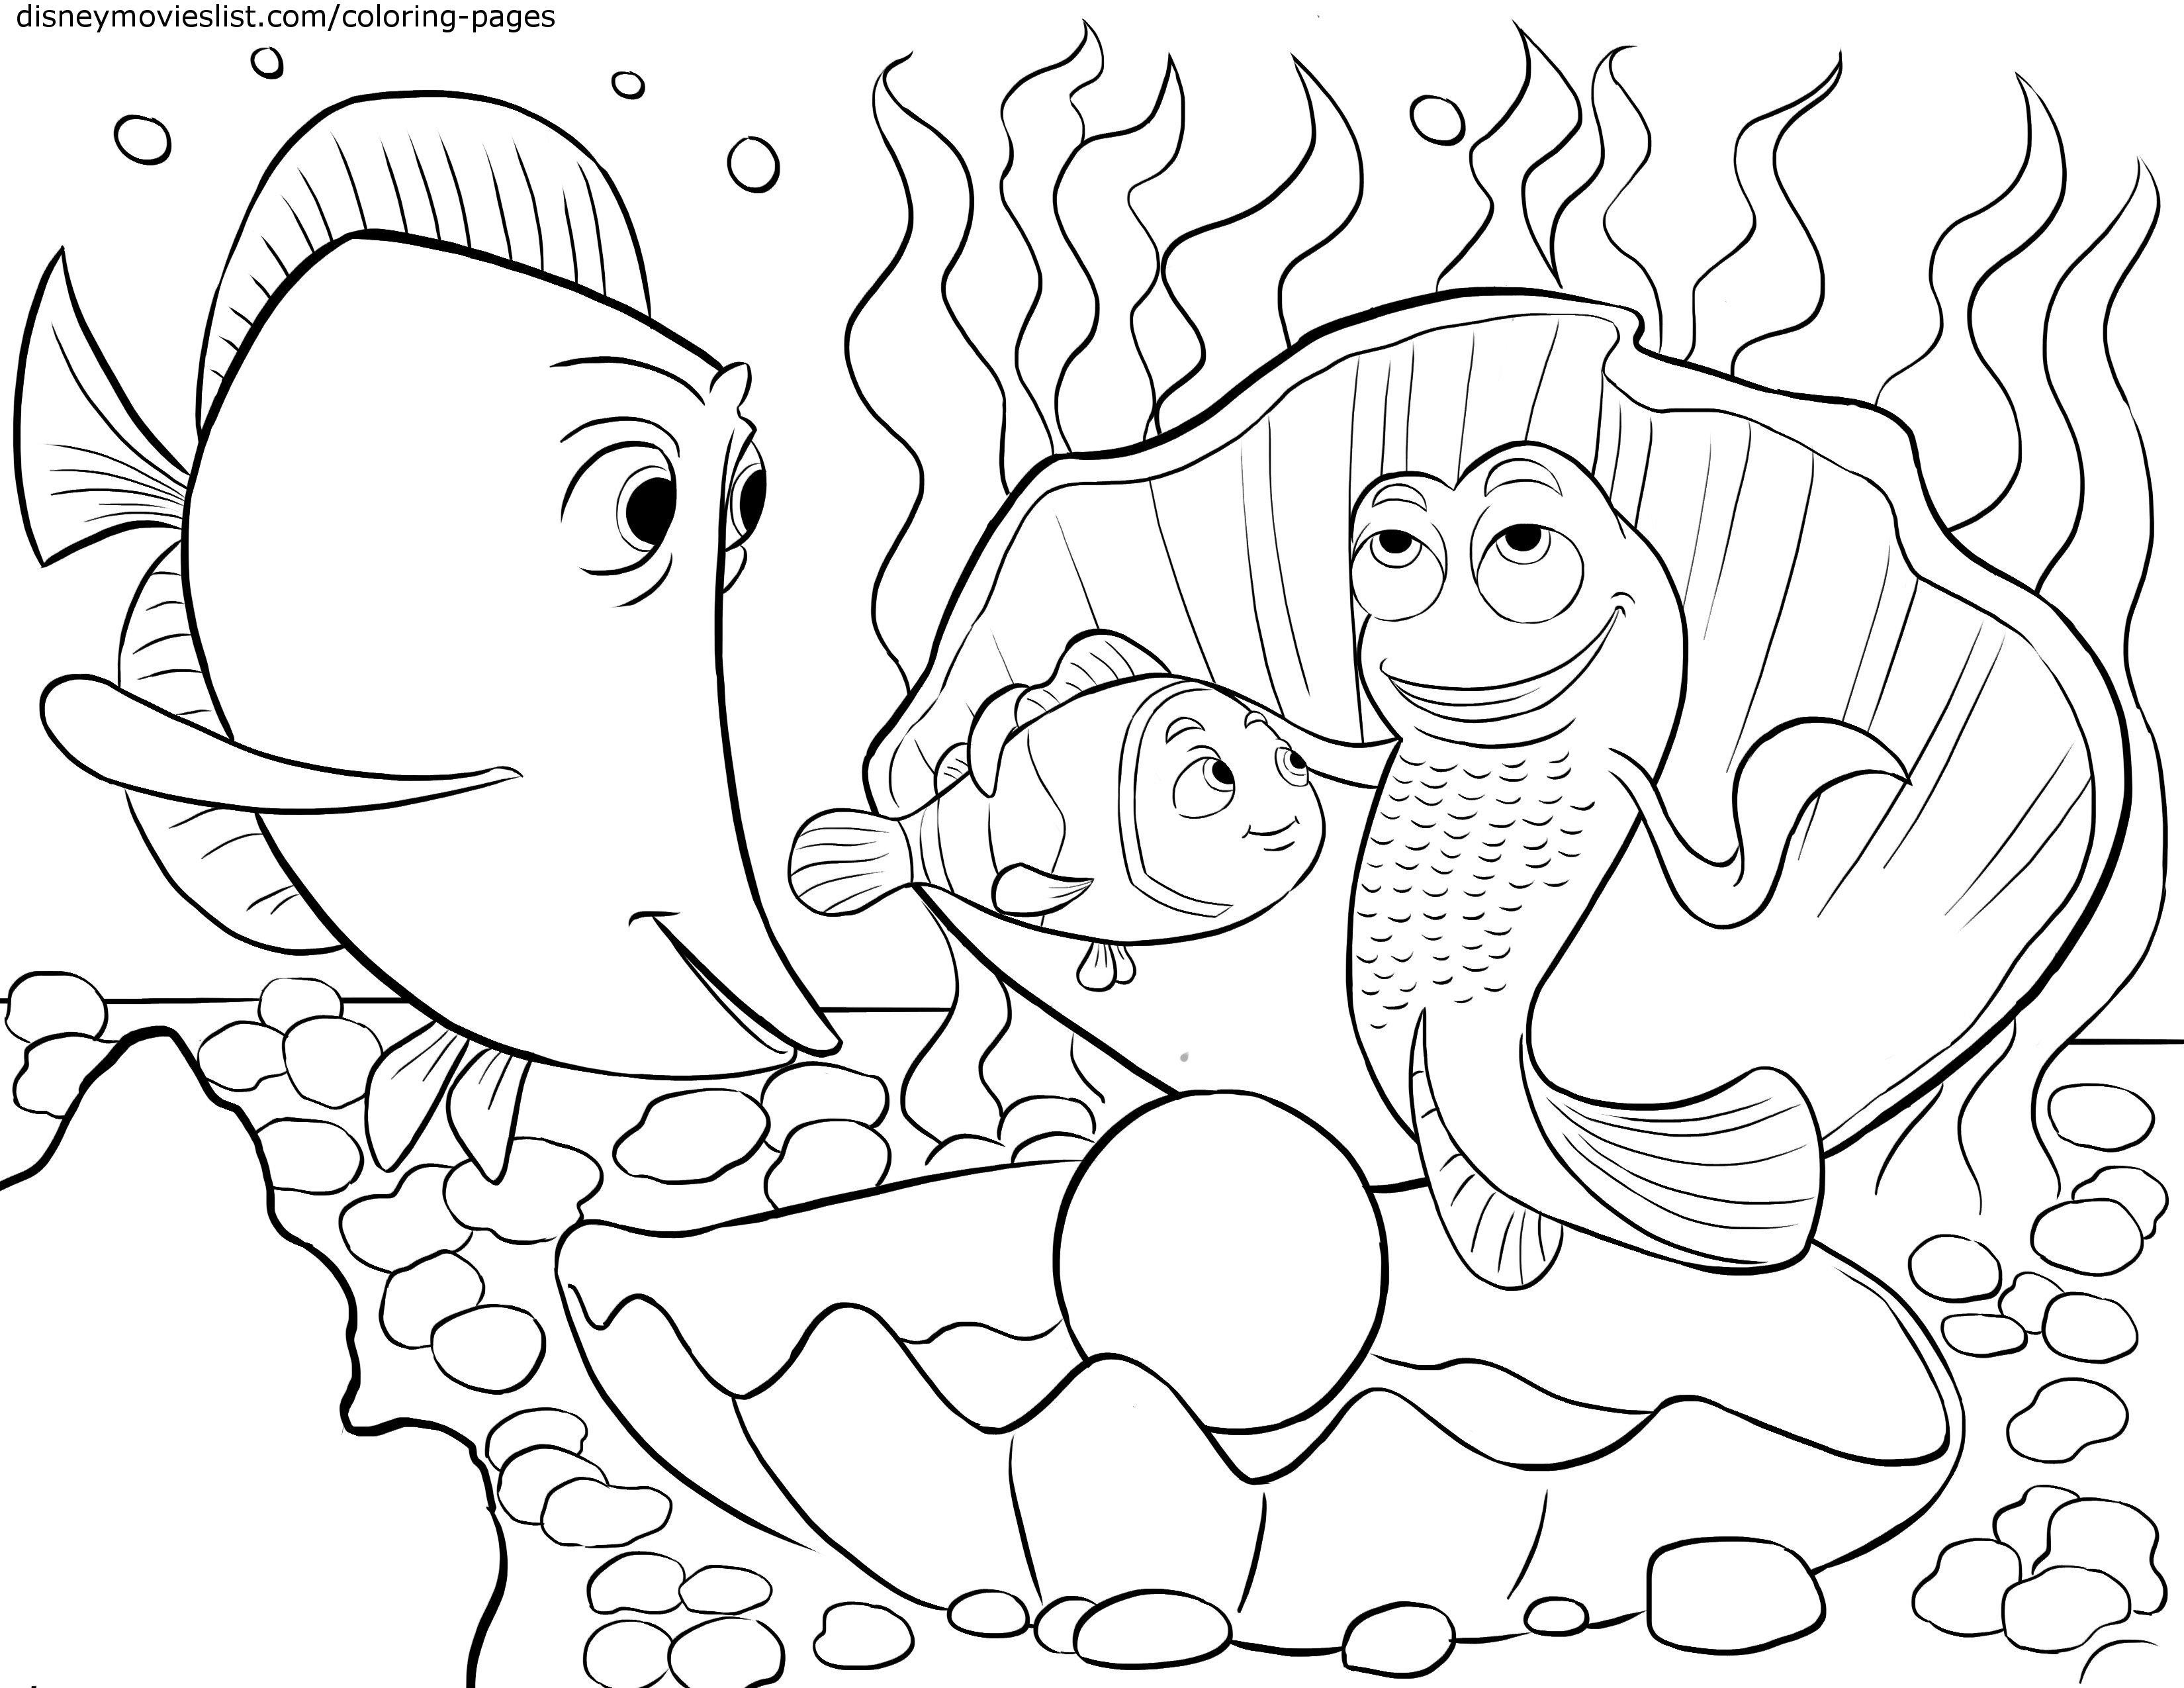 Coloring Book For Toddlers Pdf
 Coloring Pages Marvellous Coloring Pages For Kids Pdf